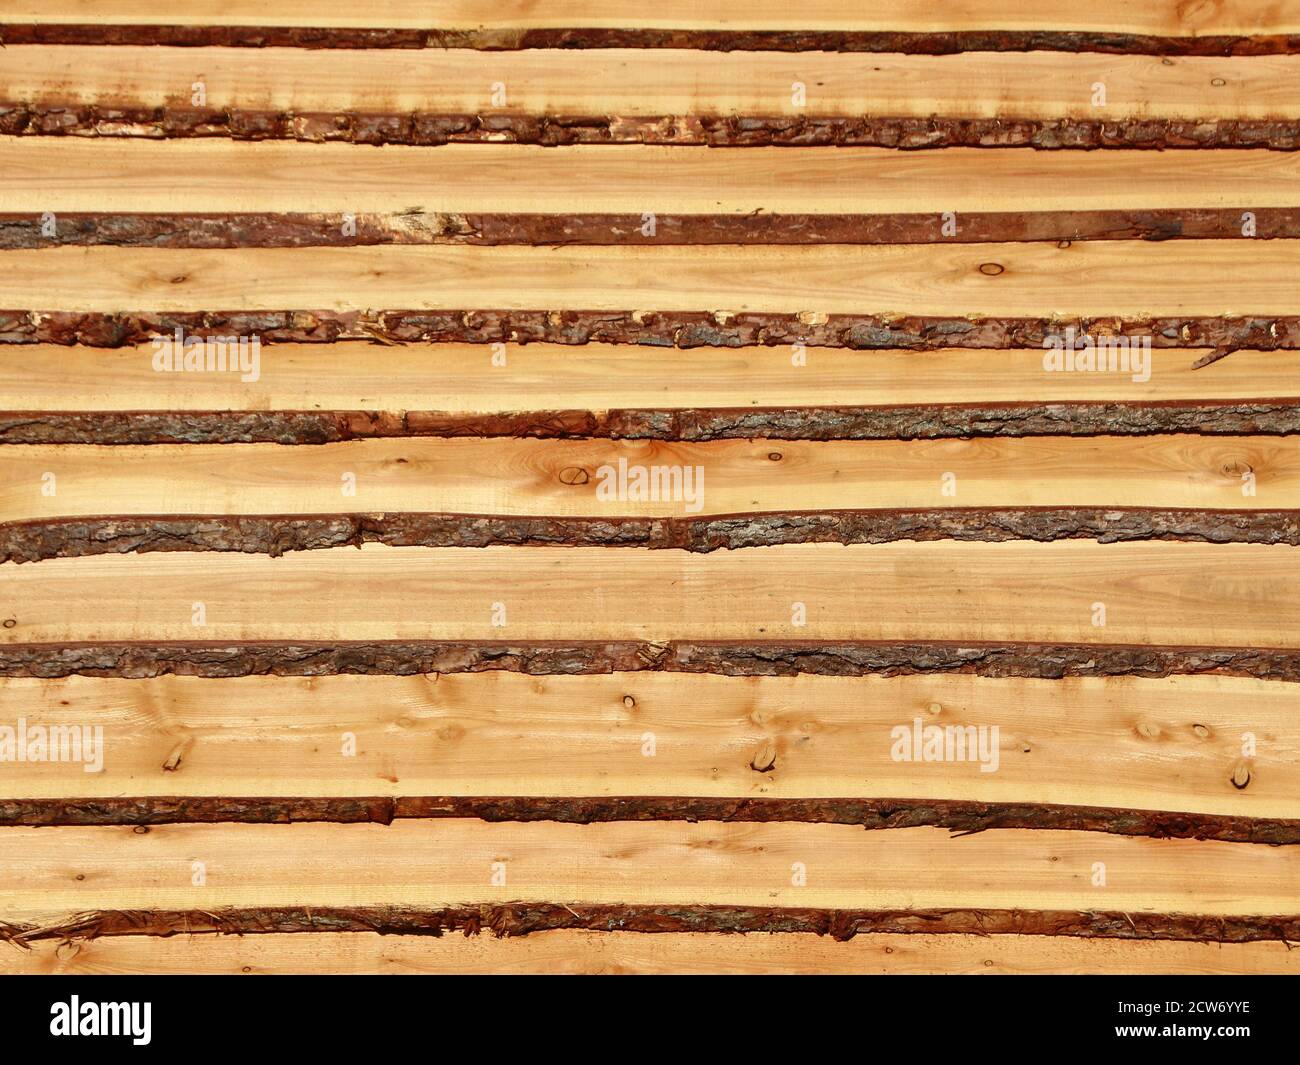 Rough wooden pine planks with bark on the side. It resembles a set of stairs. Stock Photo